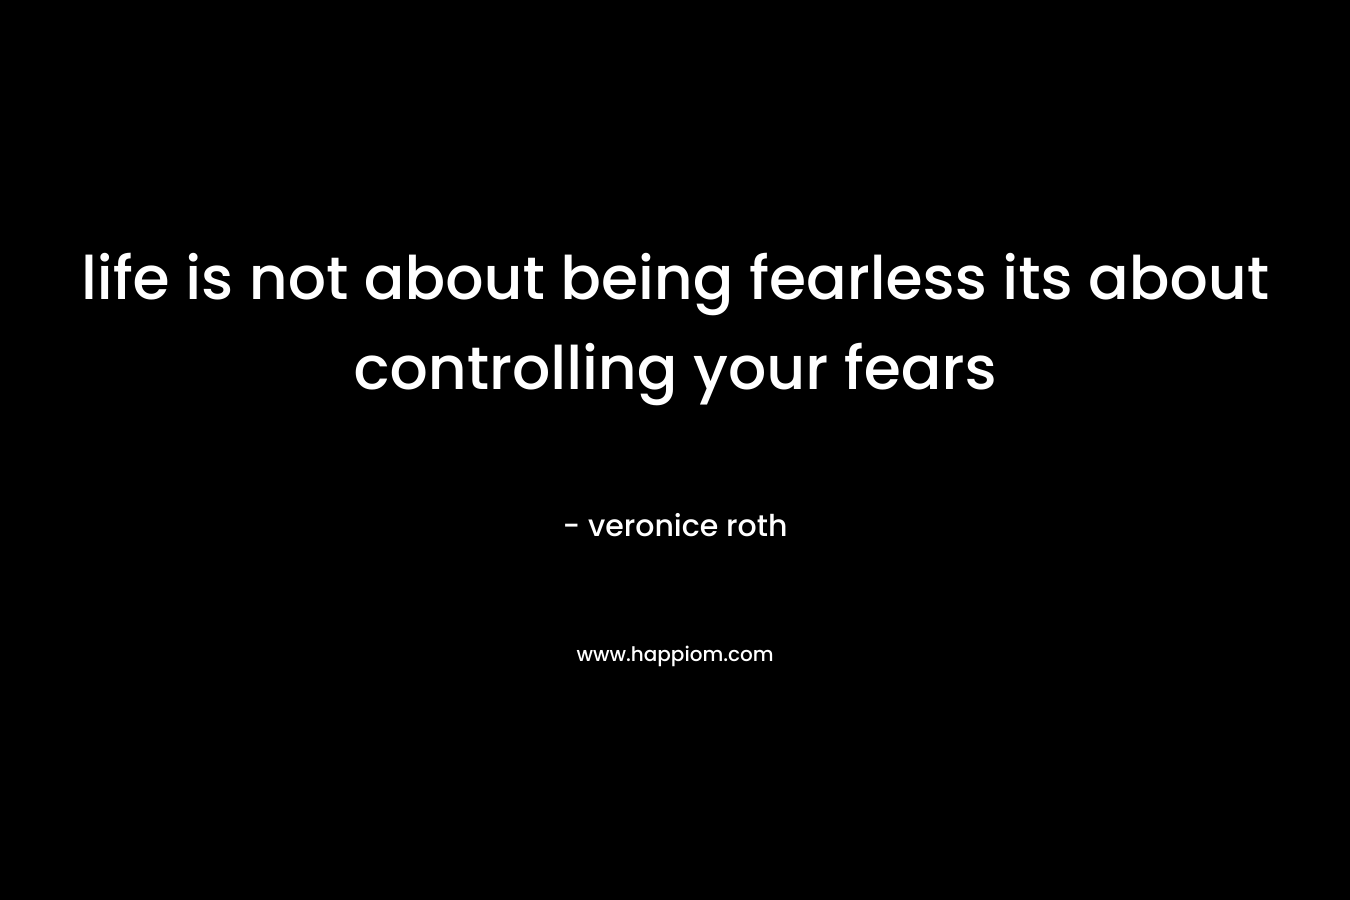 life is not about being fearless its about controlling your fears